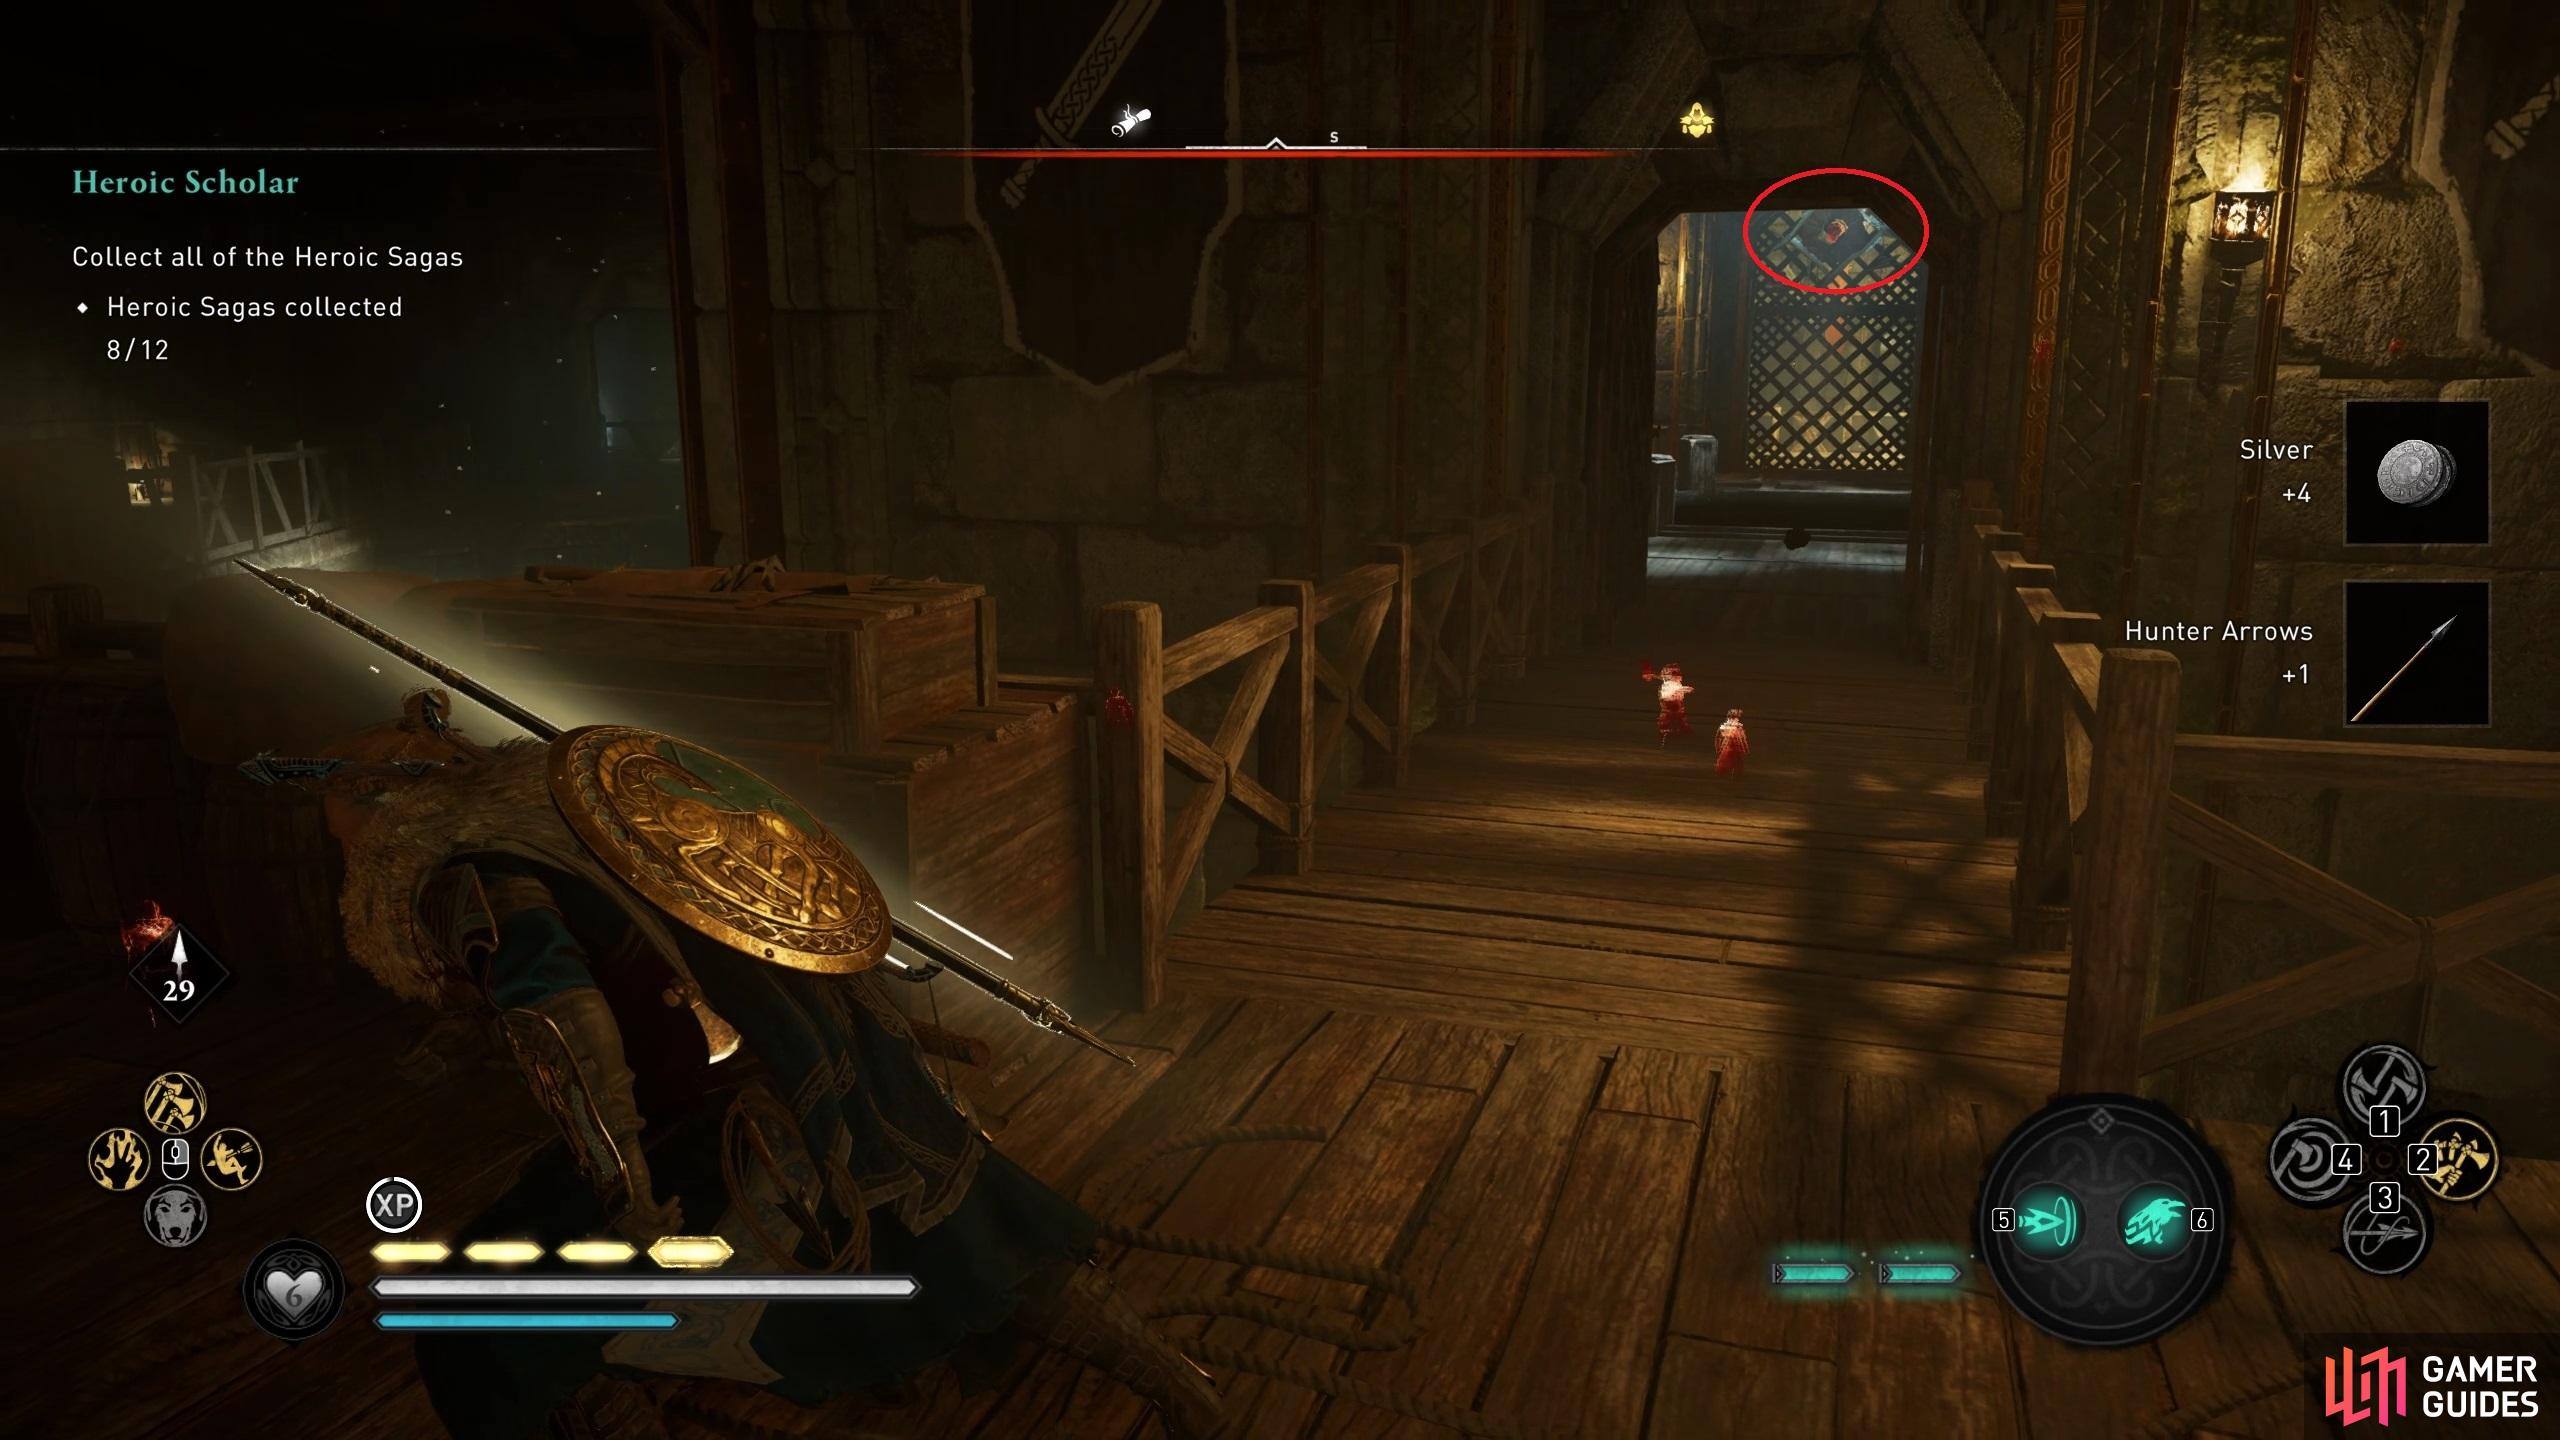 You can use the Power of Jotunheim to reach the portal in the central room.